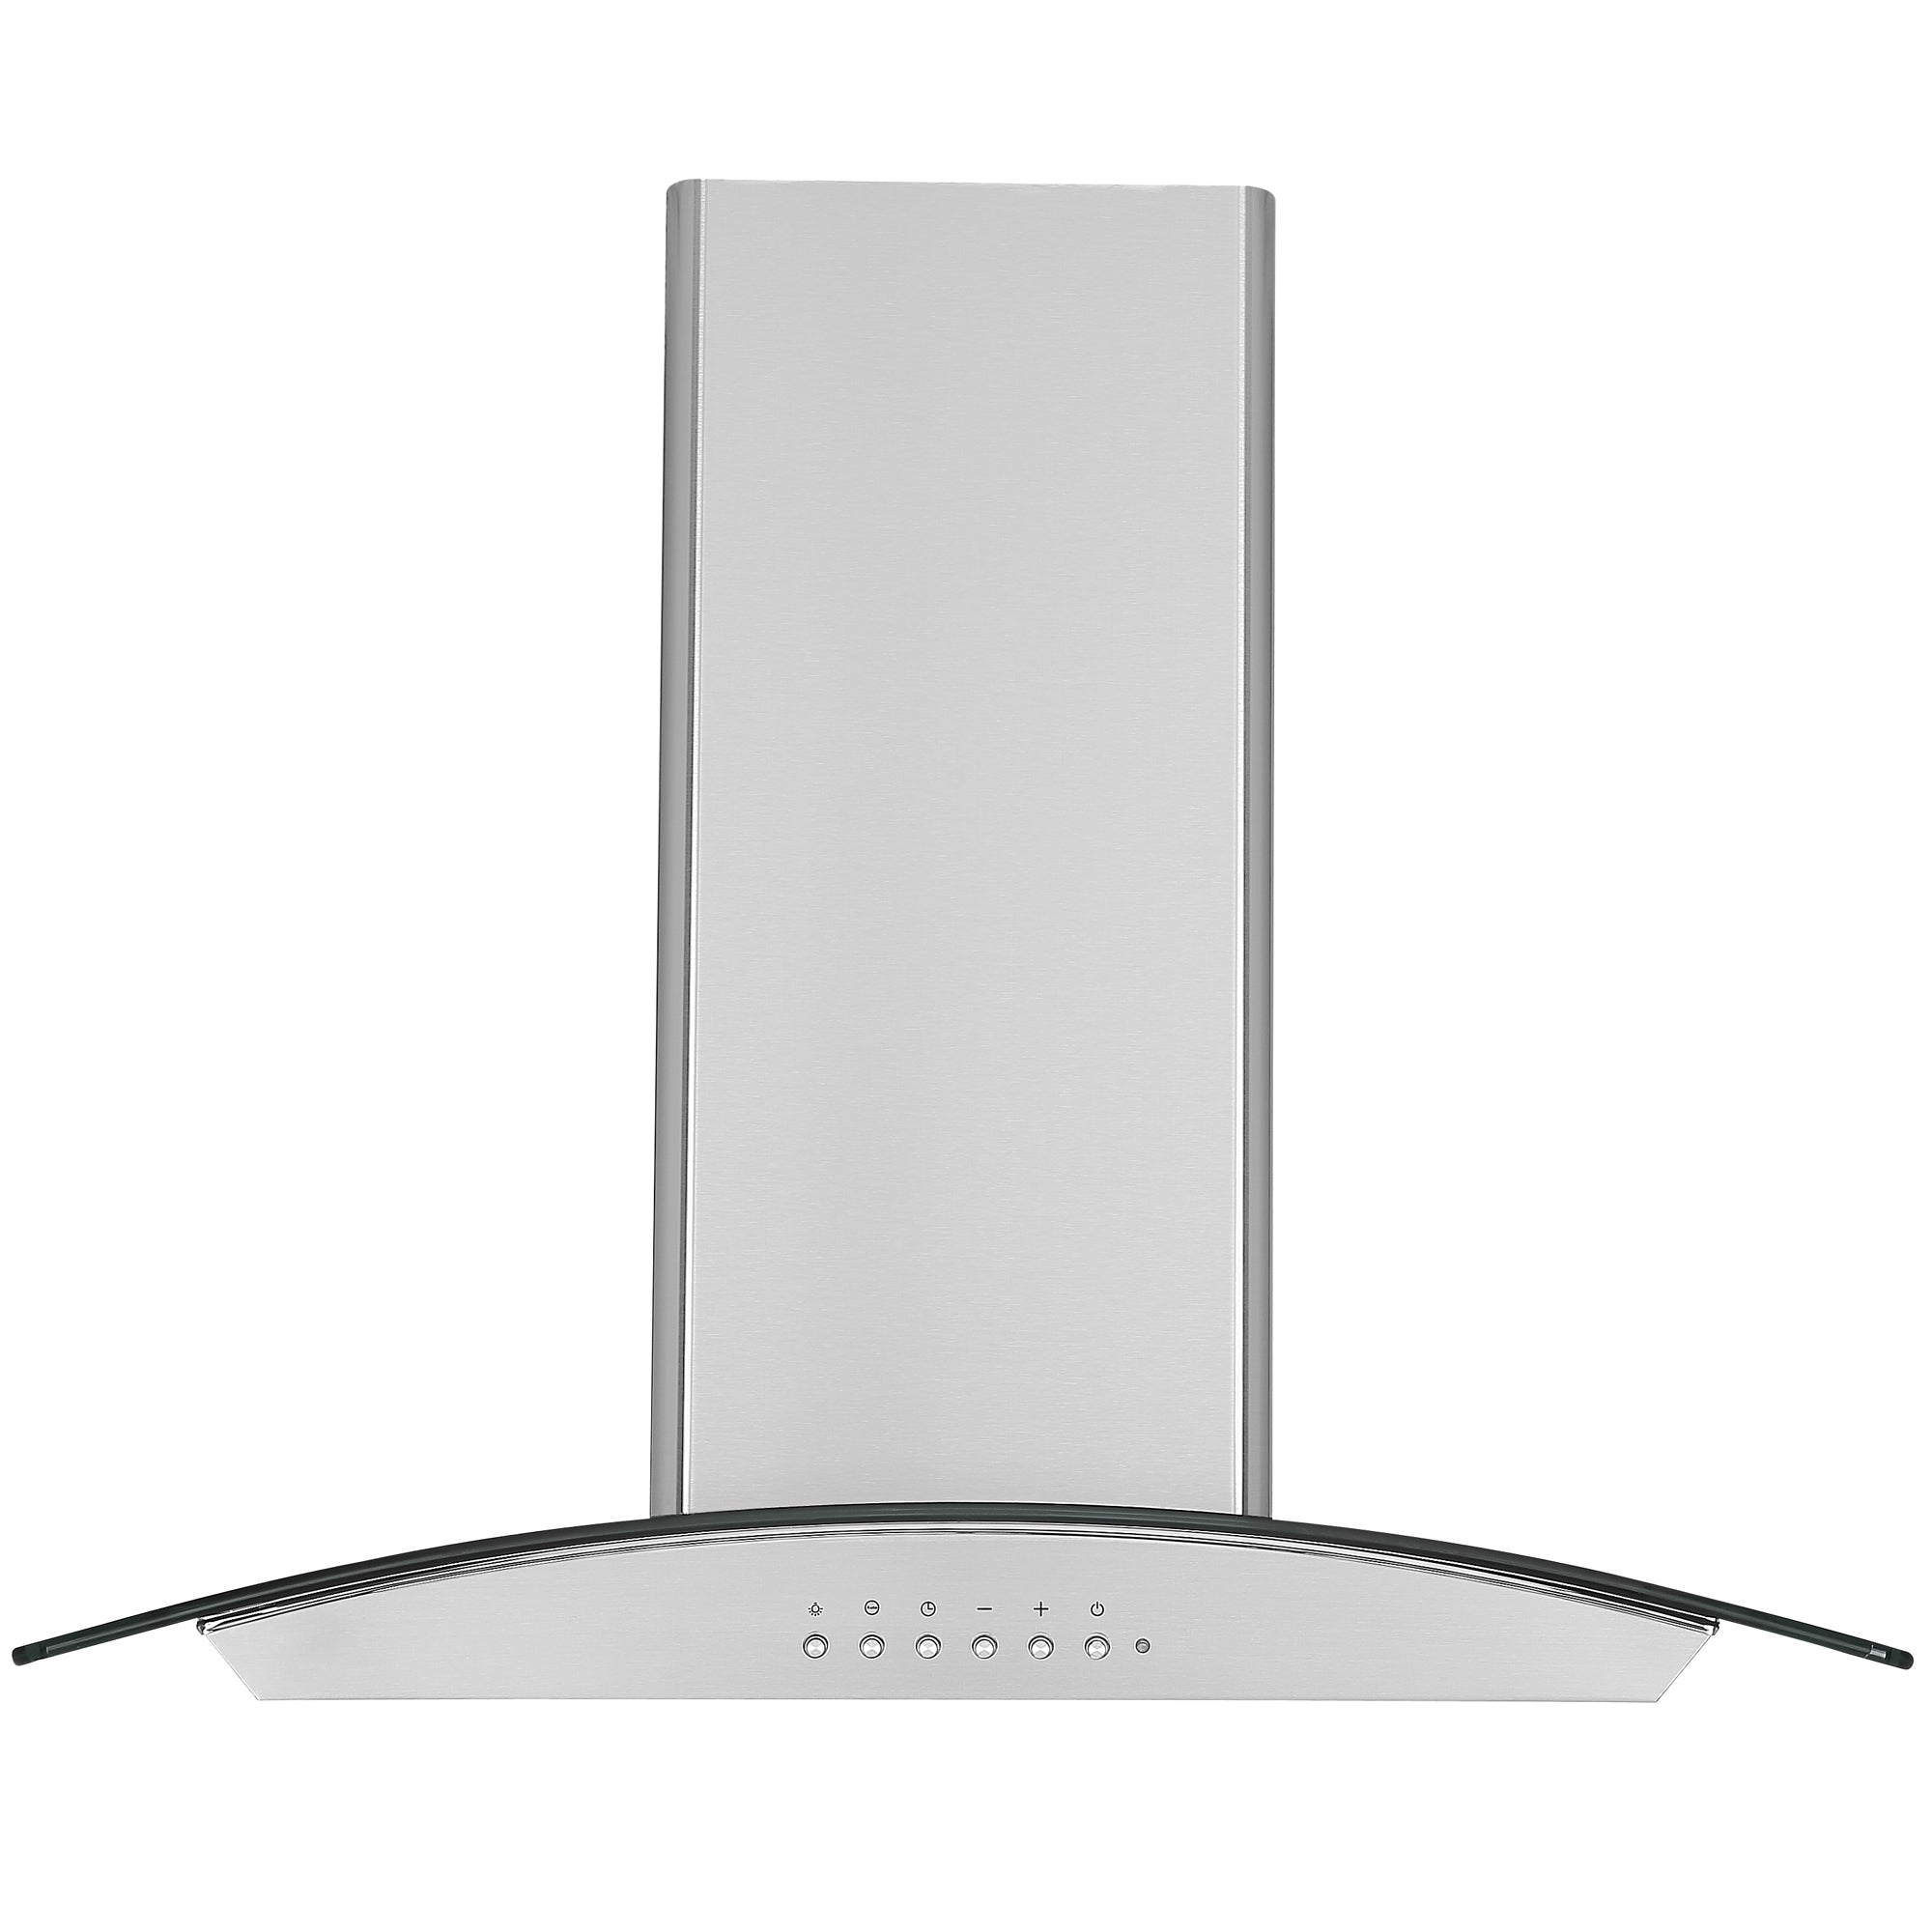 30-inch Convertible Island Glass Canopy Range Hood in Stainless Steel with Auto Night Light